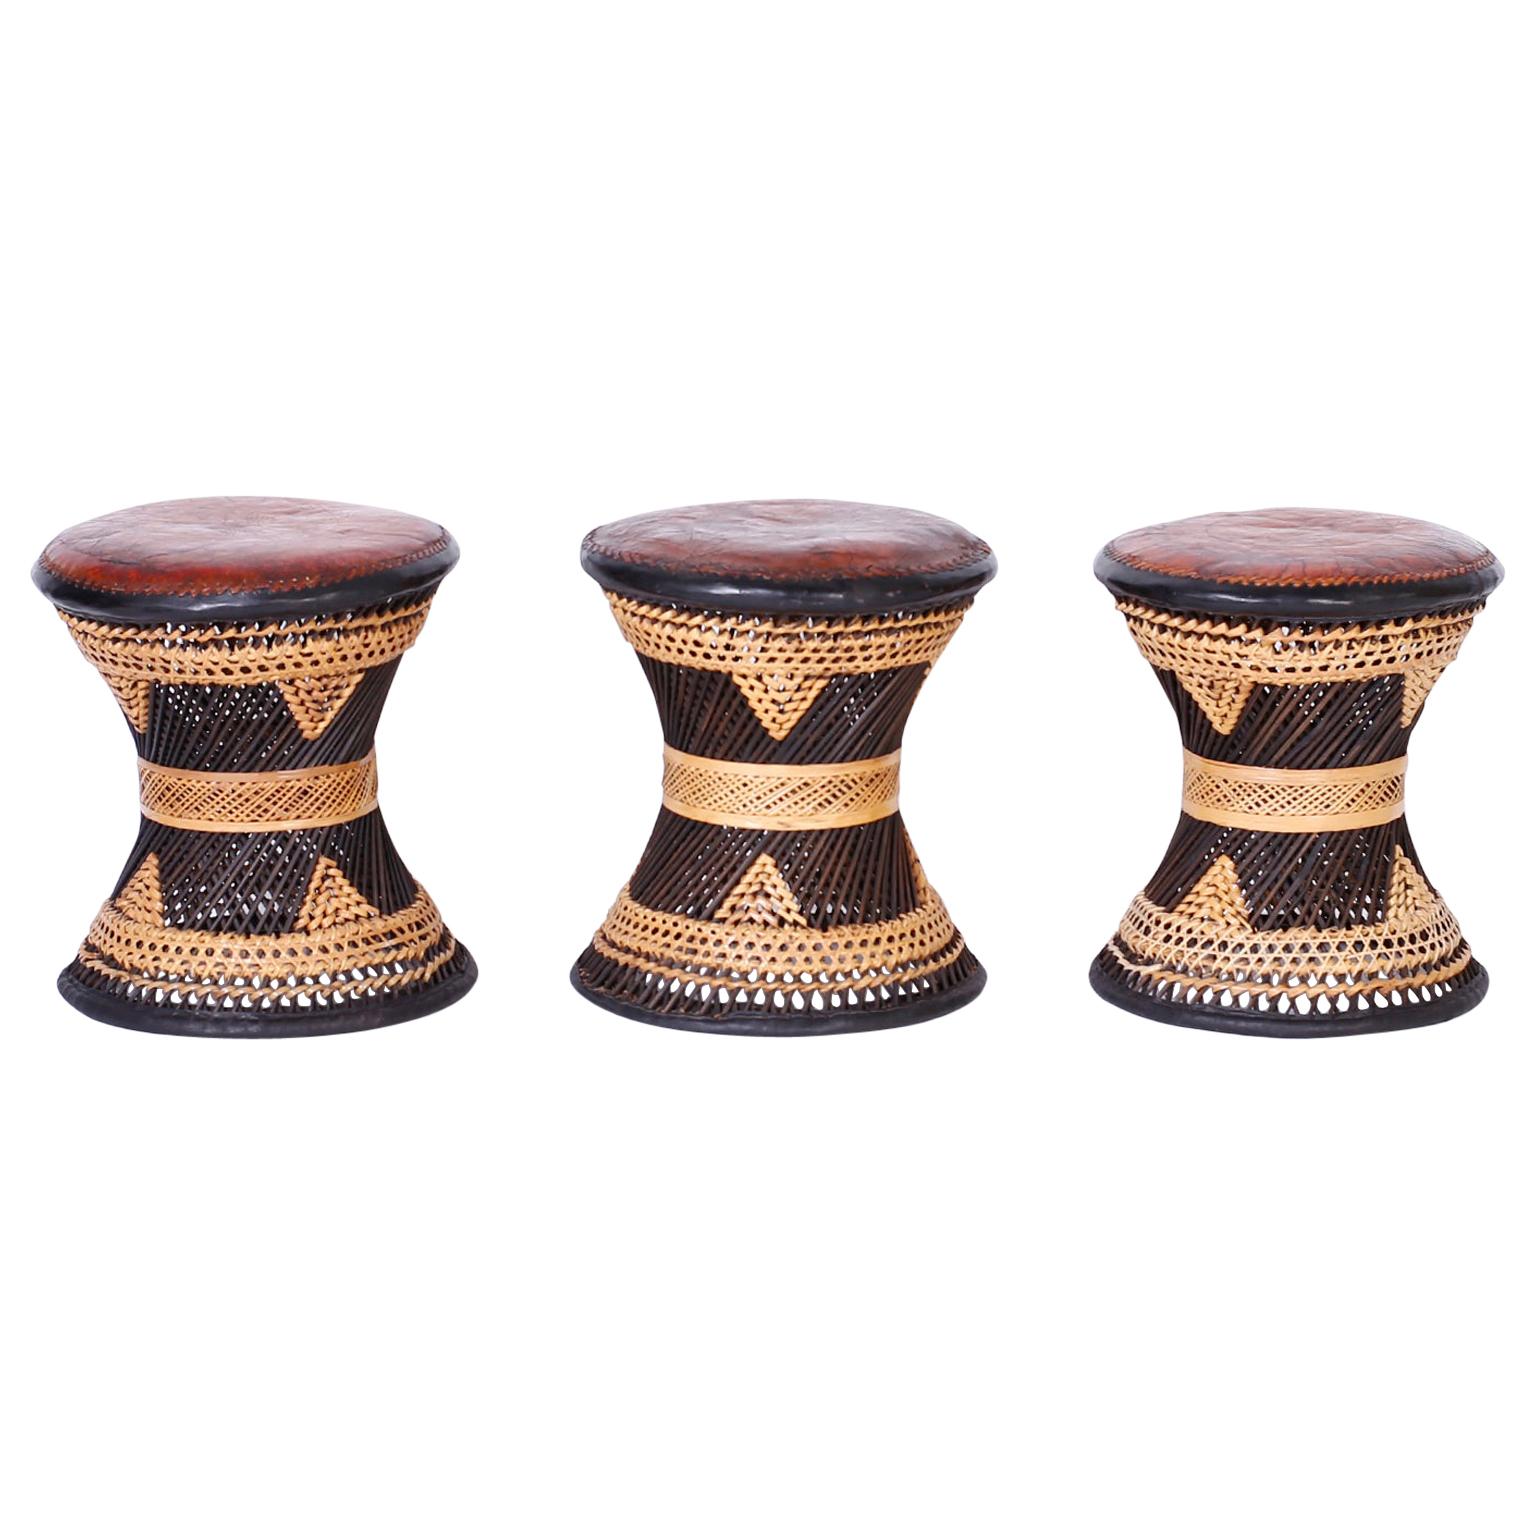 Three Moroccan Wicker and Leather Stools or Ottomans, Priced Individually